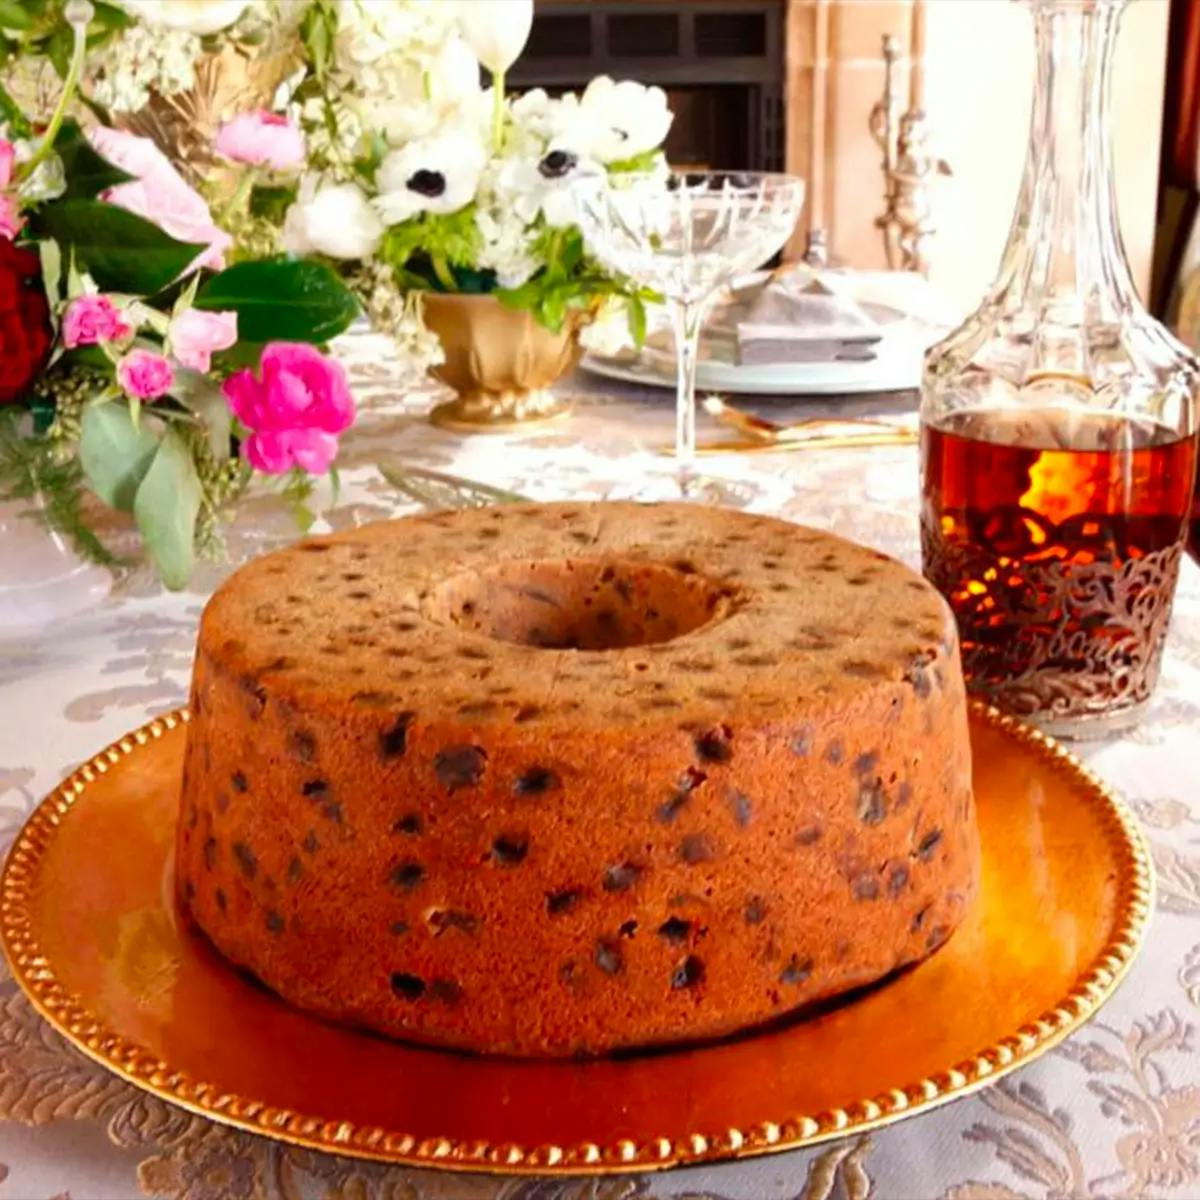 A bourbon-soaked fruit cake on a platter with a decanter of bourbon in the background.